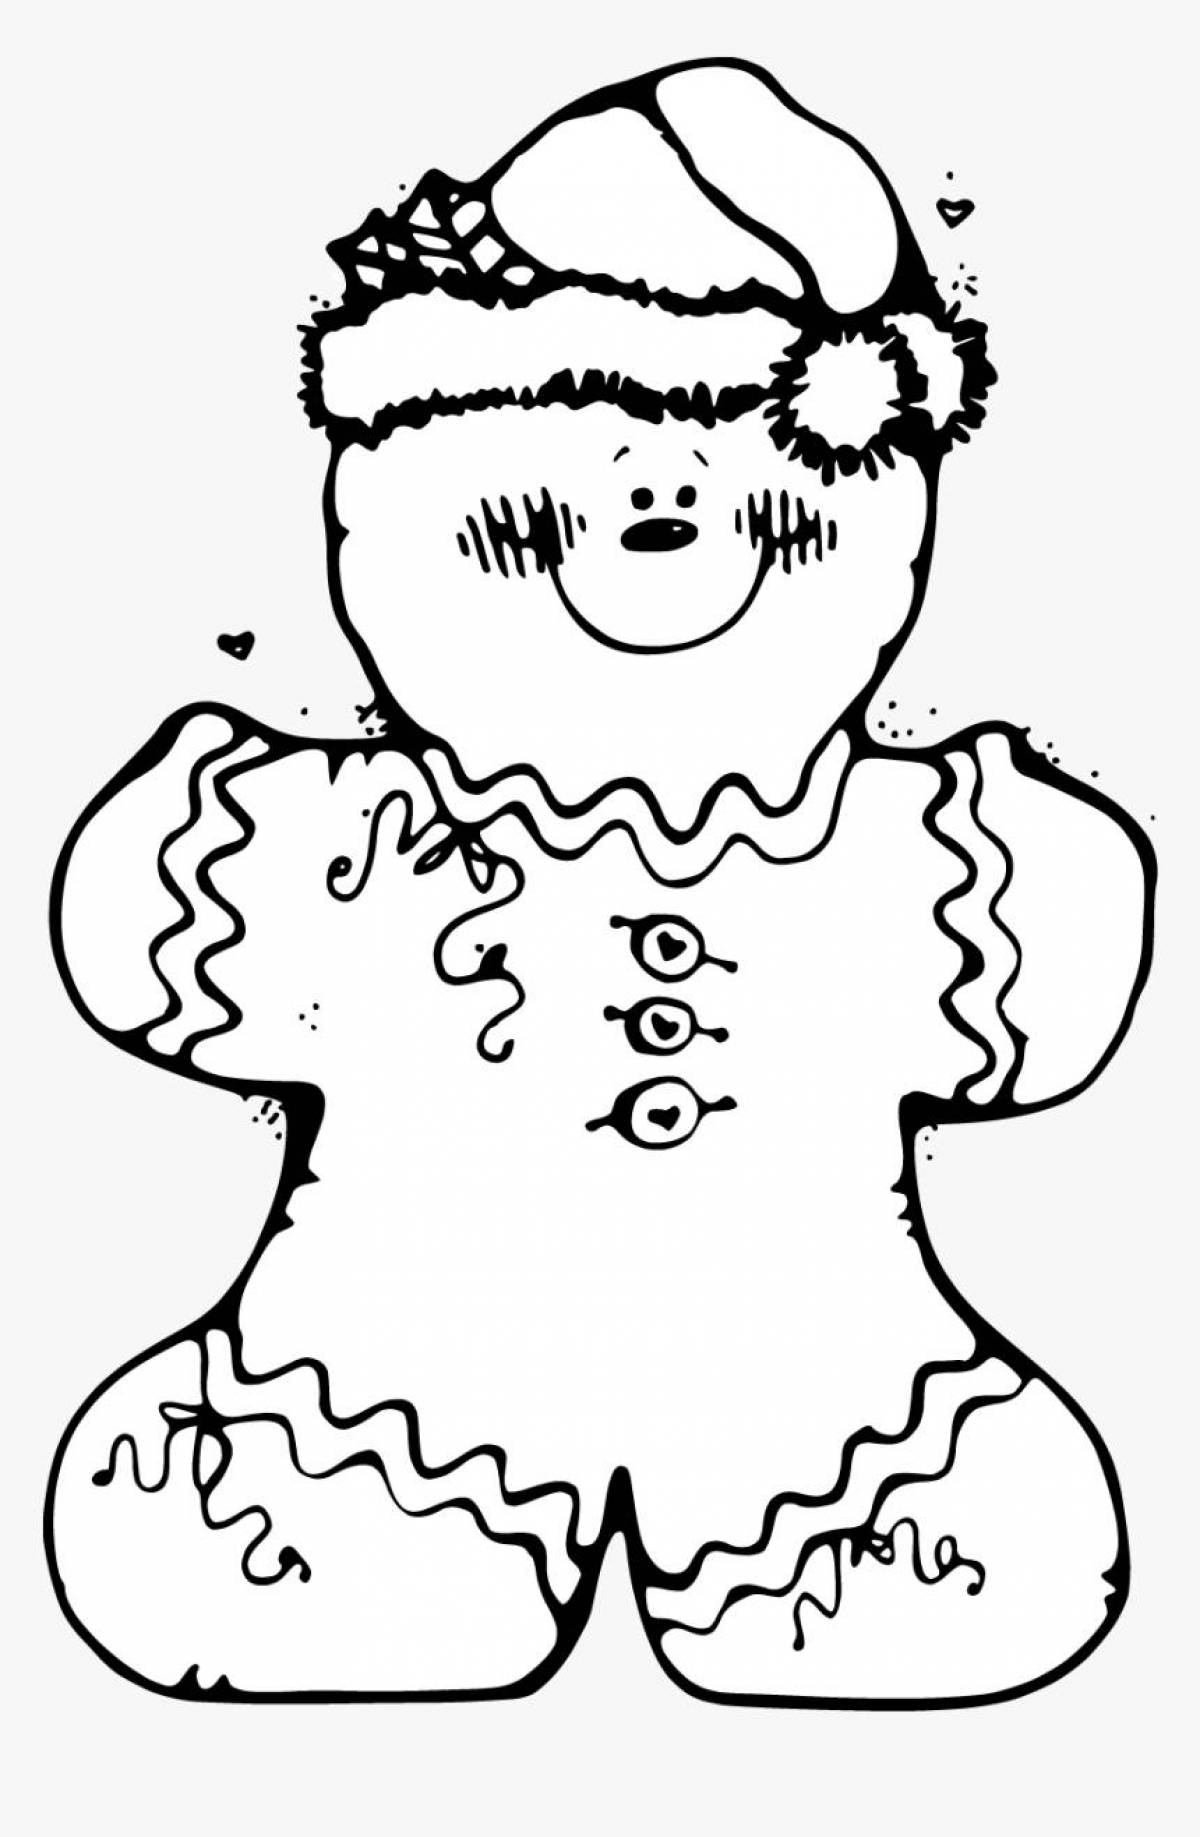 Shiny gingerbread coloring page